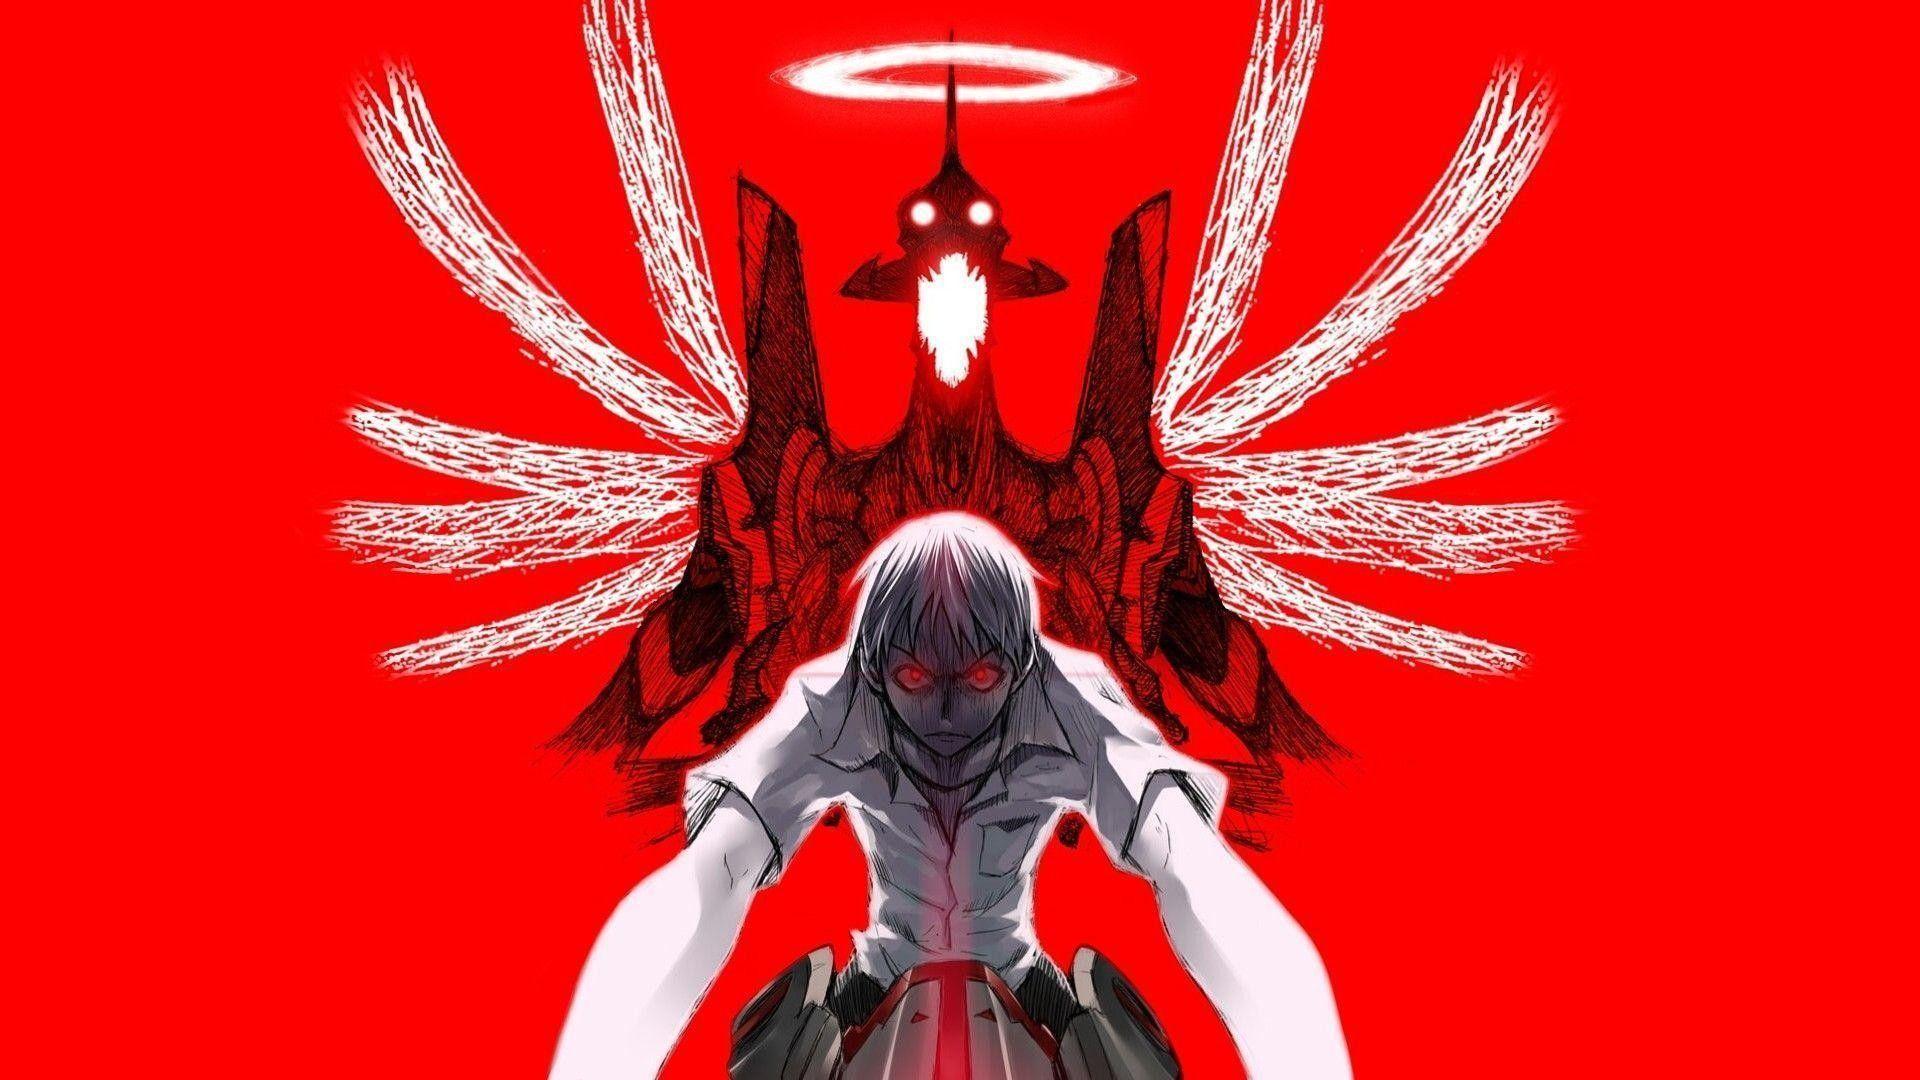 Heres some NGE iPhone wallpapers Post yours if you have any   rNeonGenesisEvangelion